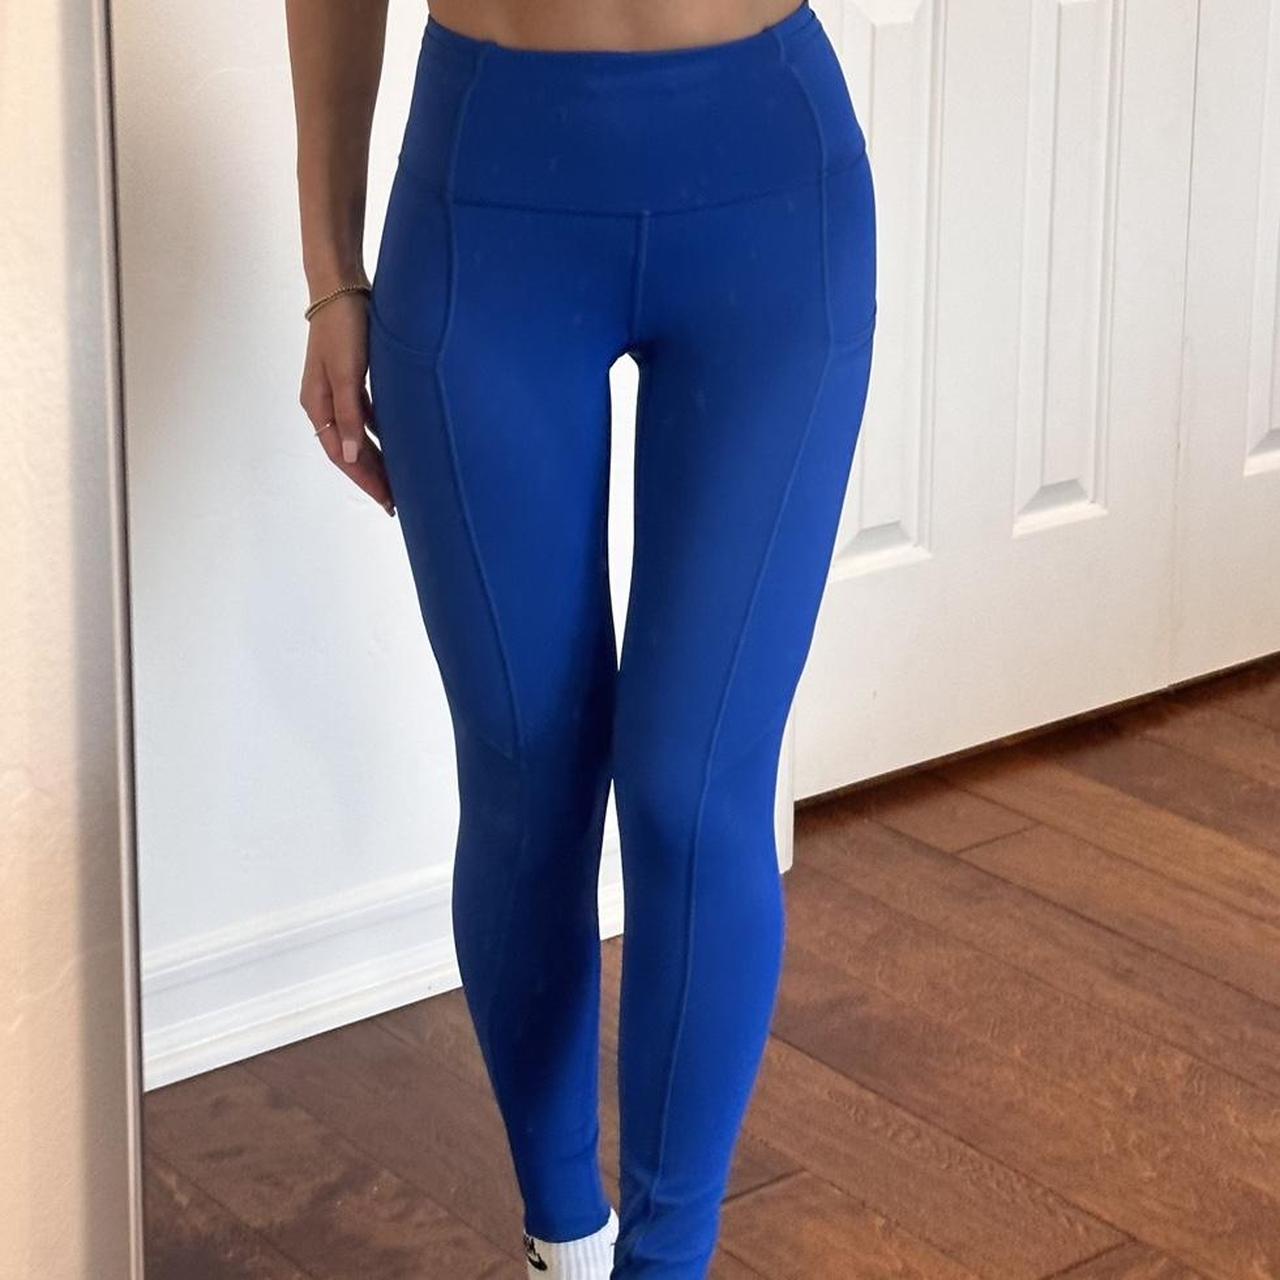 Lululemon leggings with two pockets on each